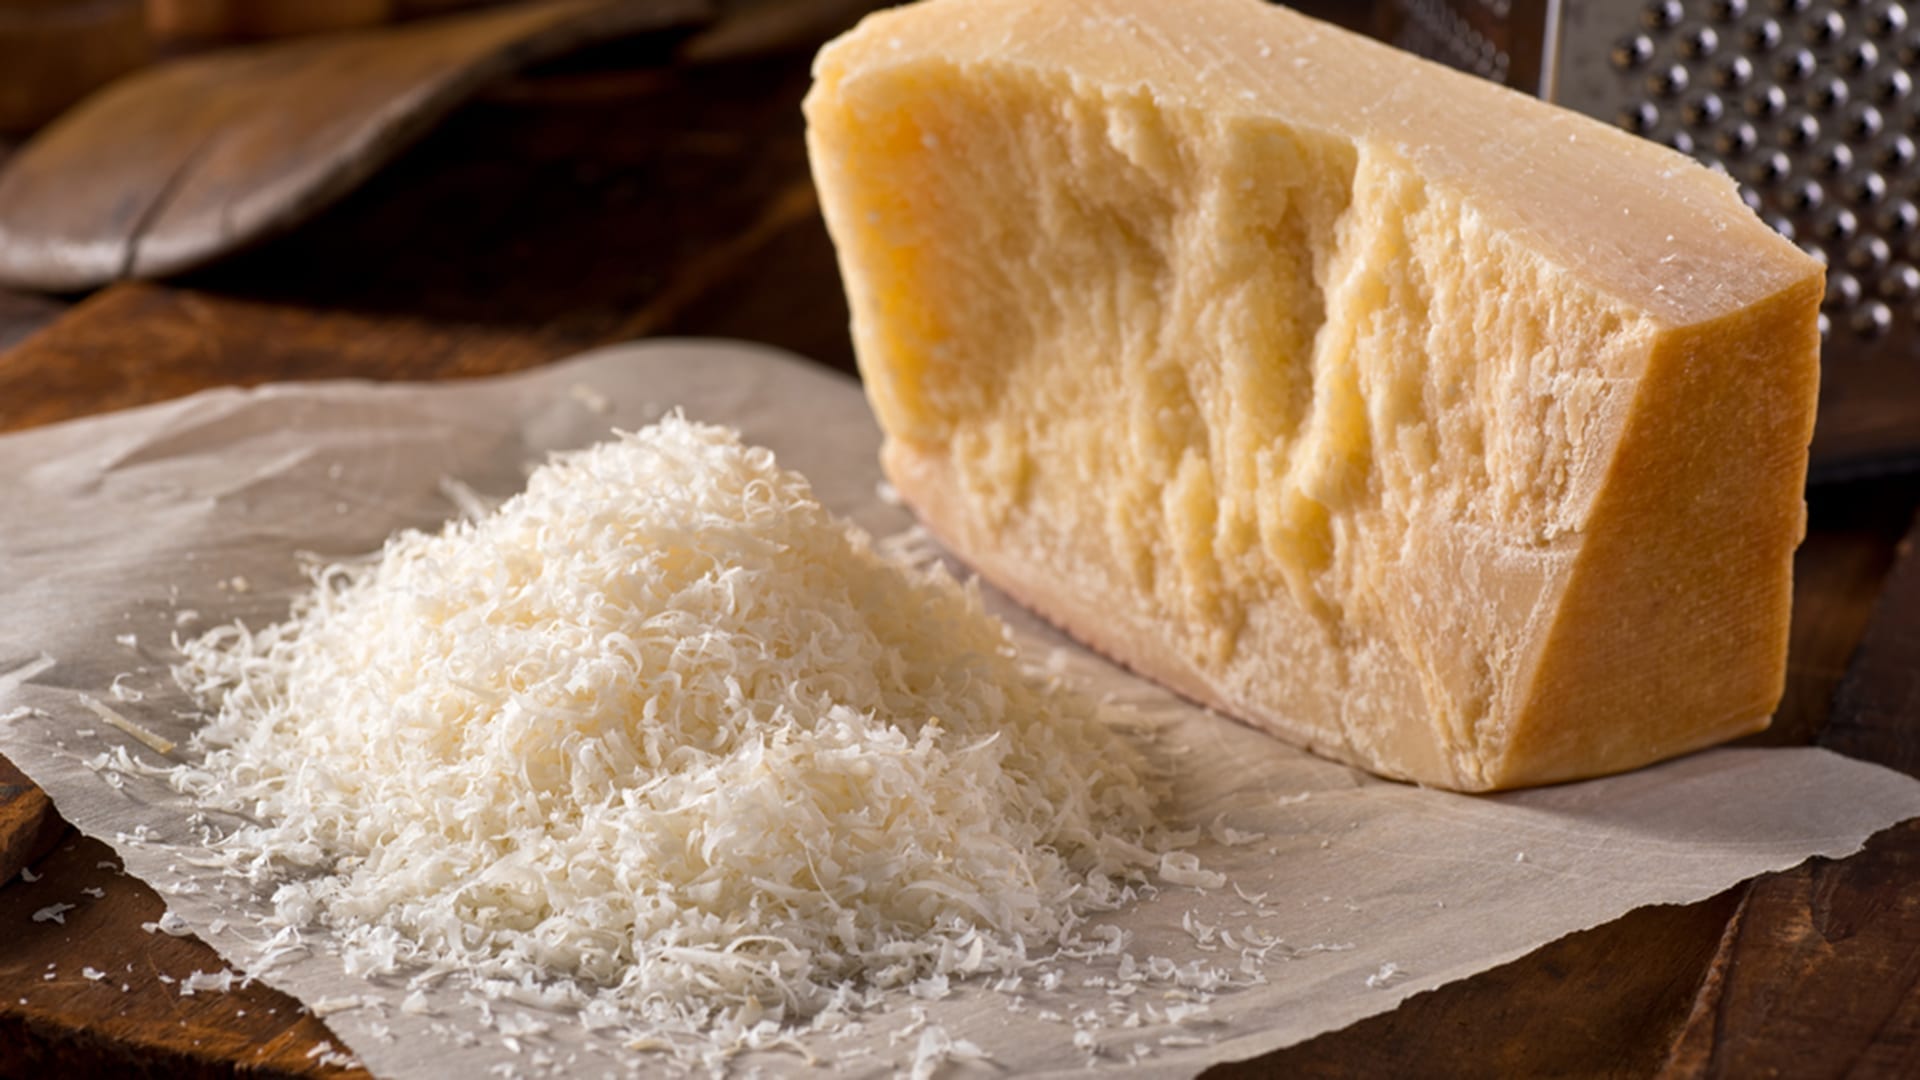 10 Cheesy Facts About the Parmesan Cheese That Came From Italy 7